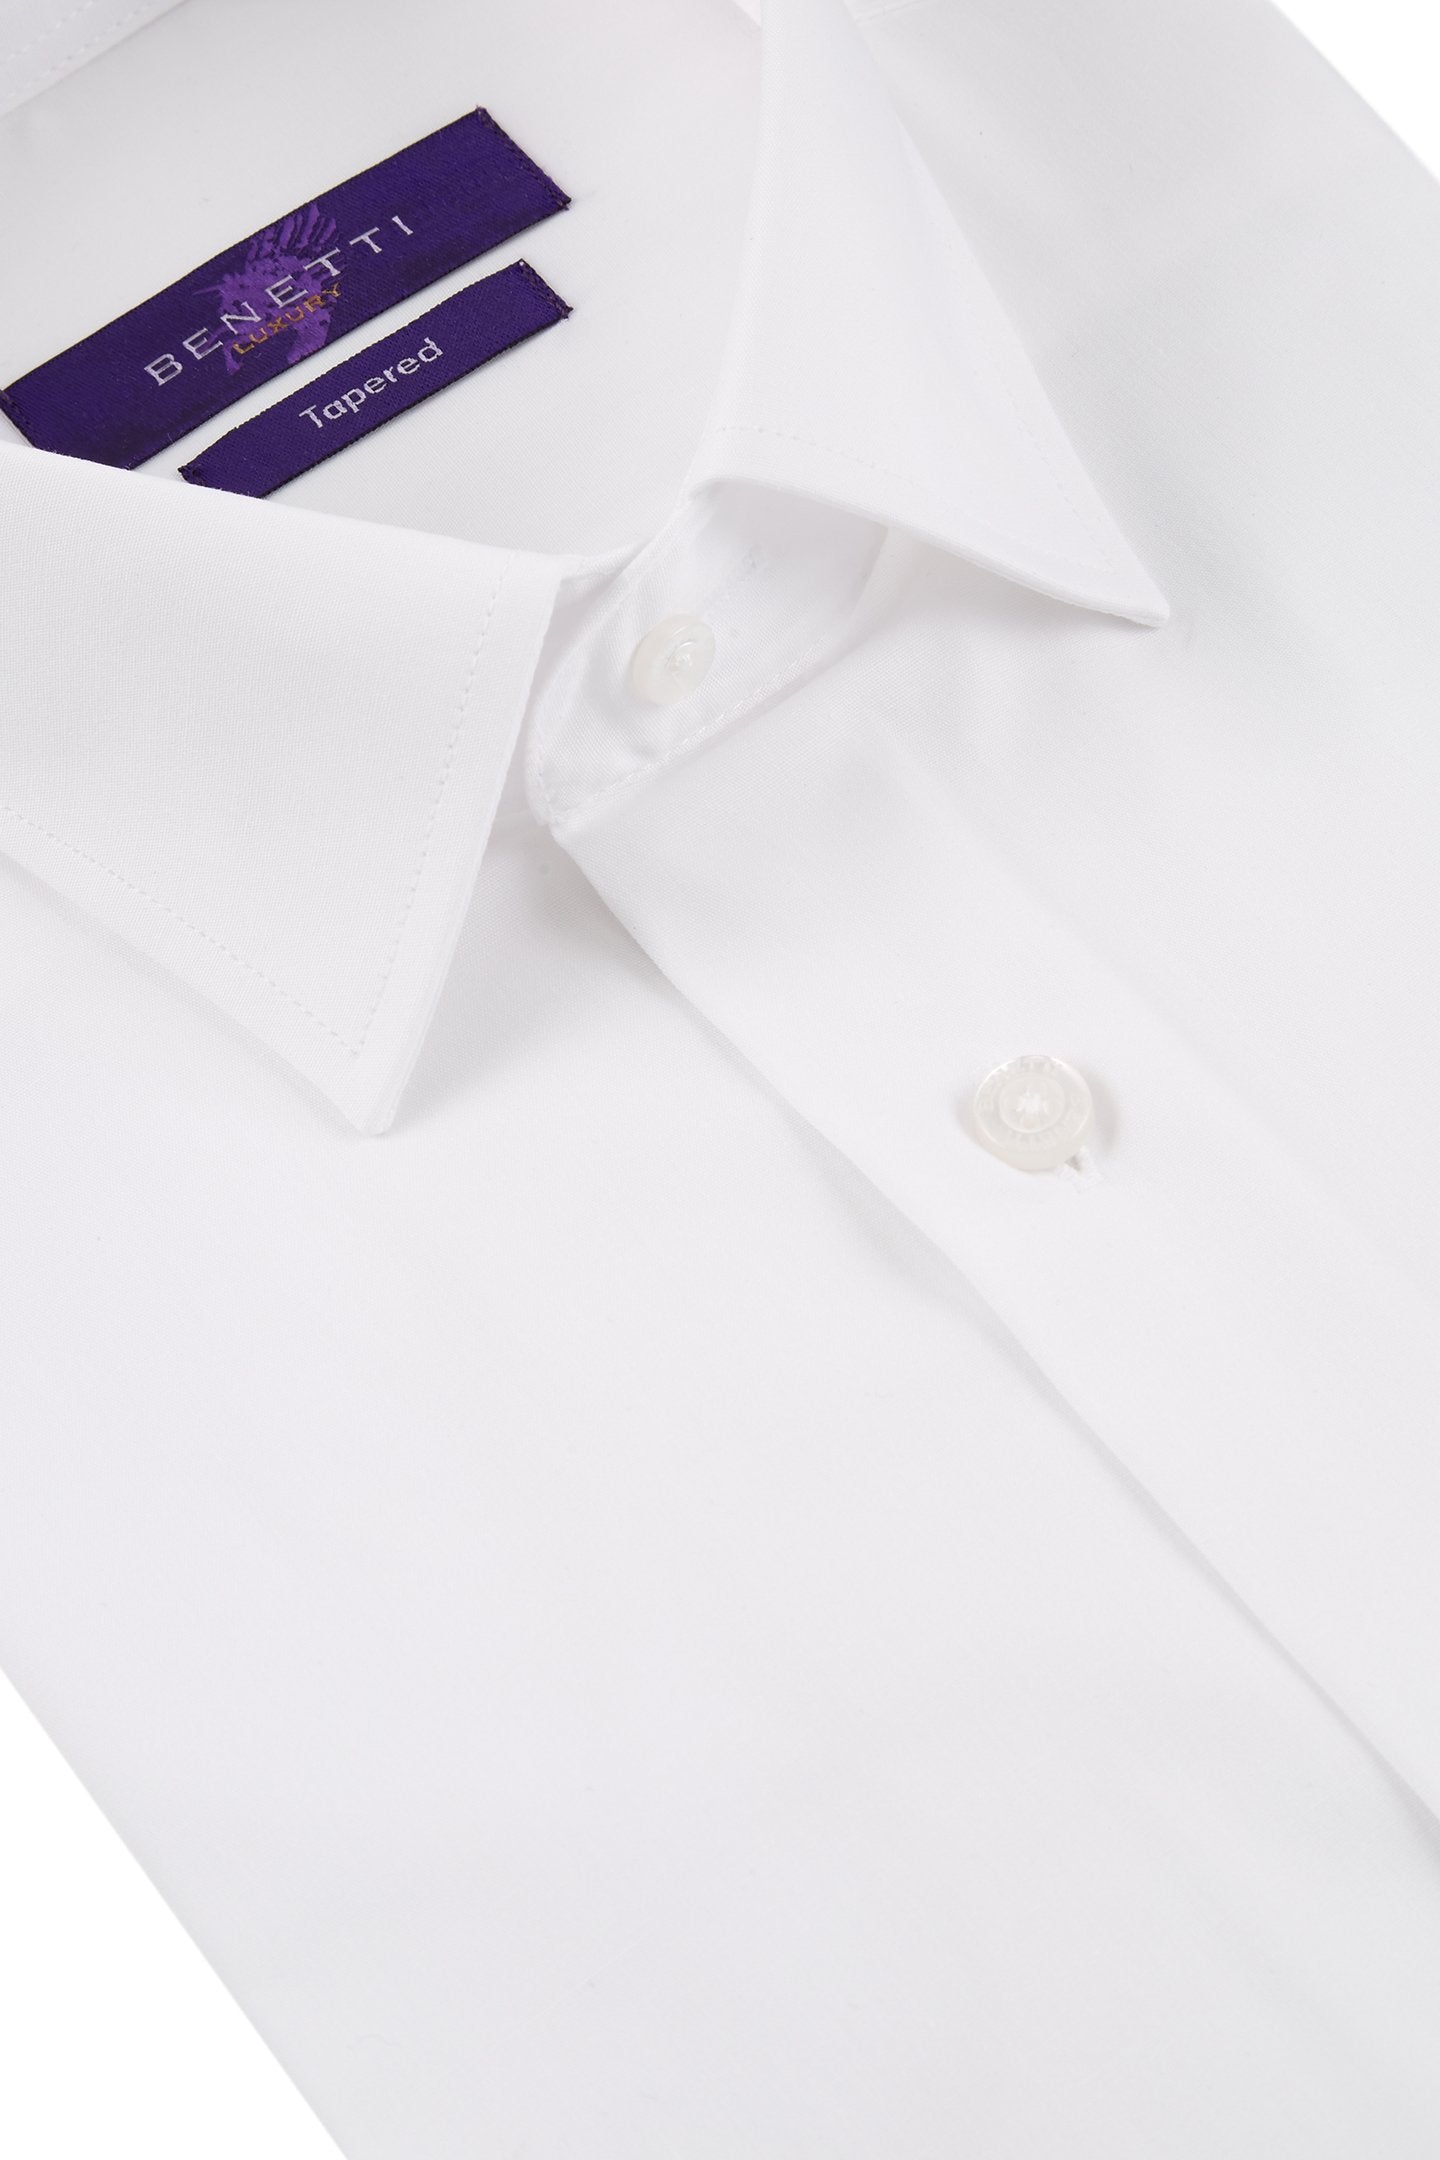 White Tapered Fit Suit Shirt By Benetti - Spirit Clothing